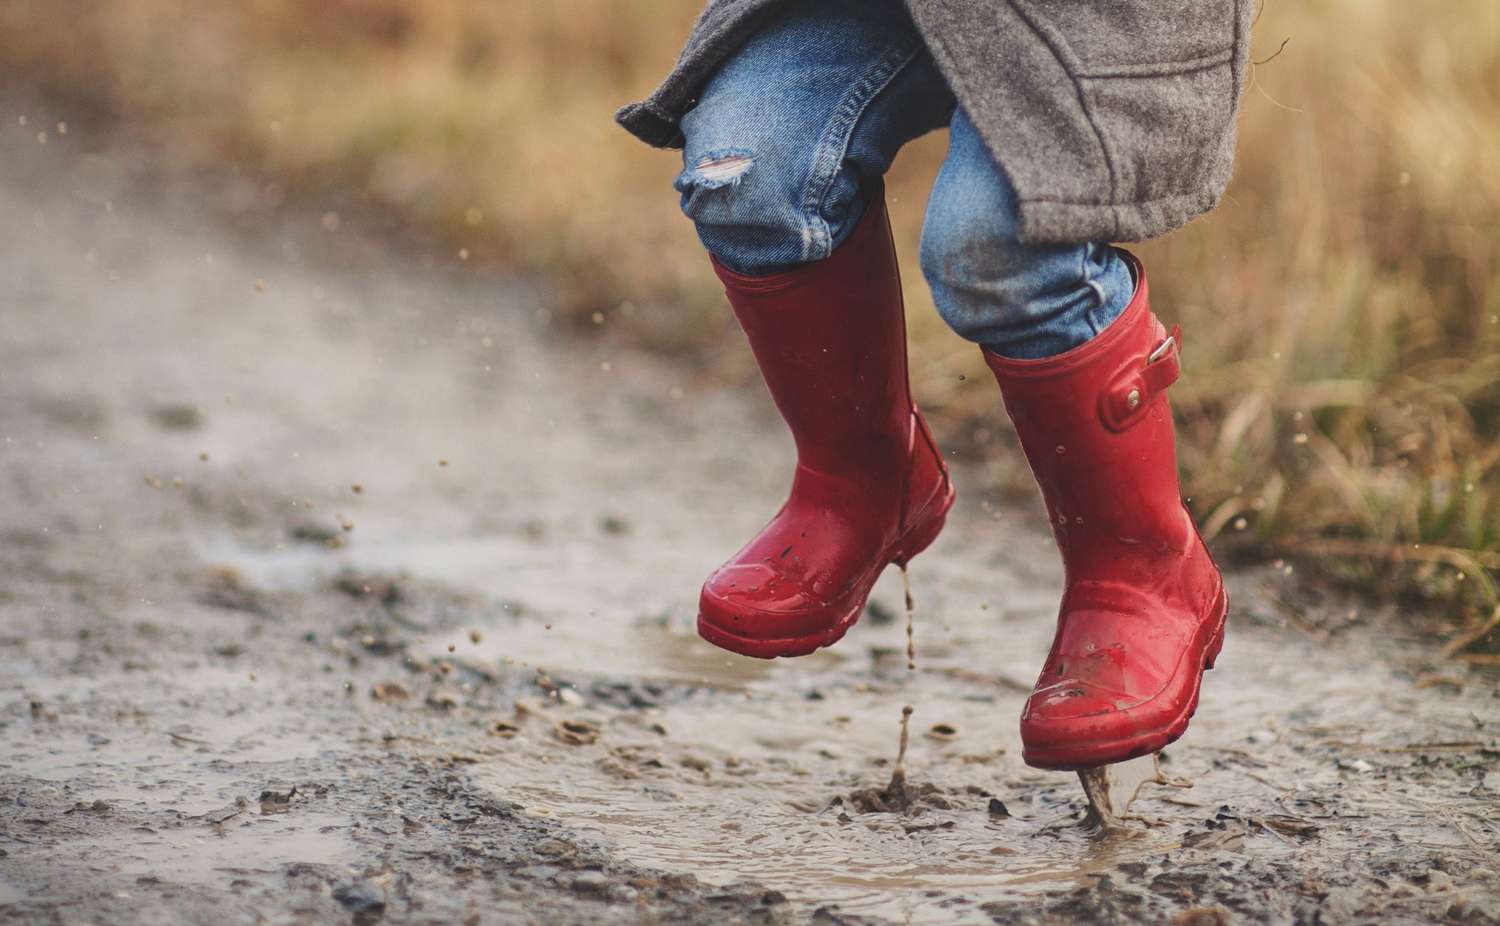 What is the importance of rubber boots in farming?